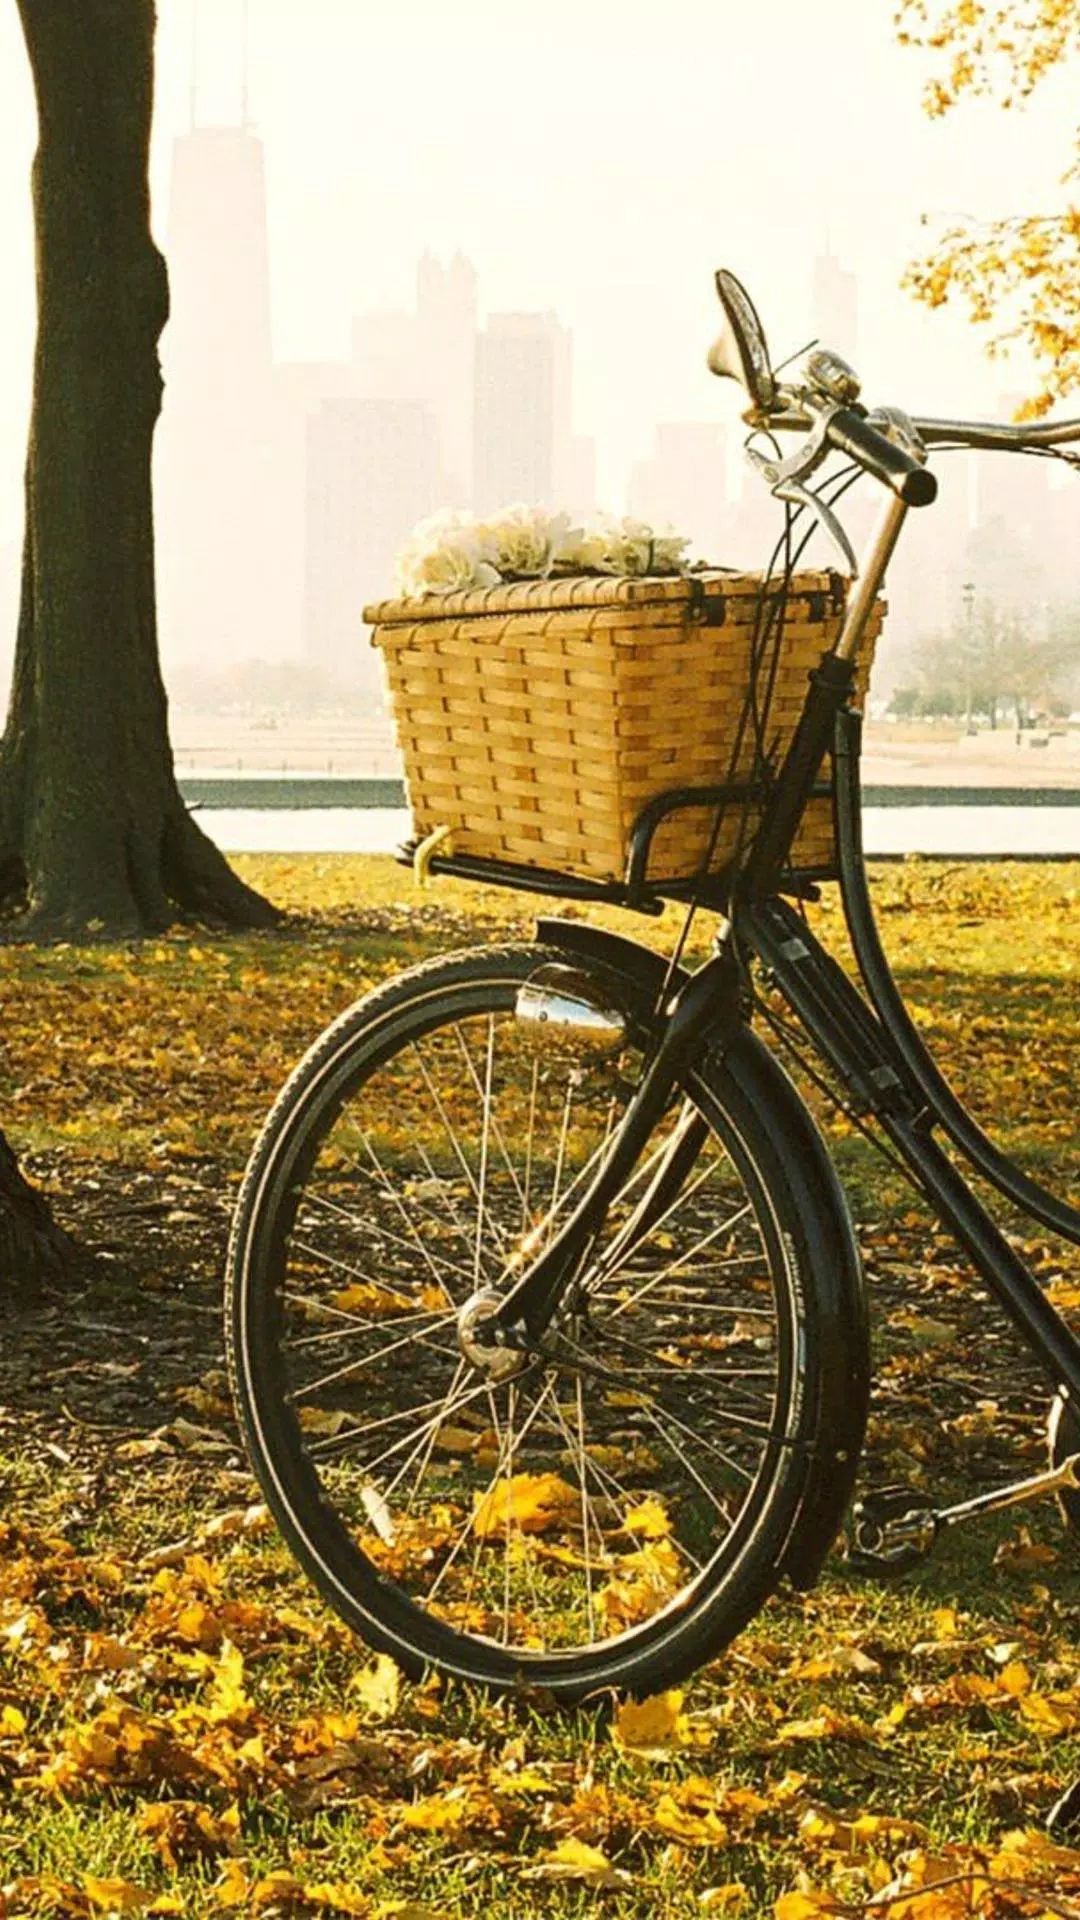 Bicycle wallpapers hd apk for android download